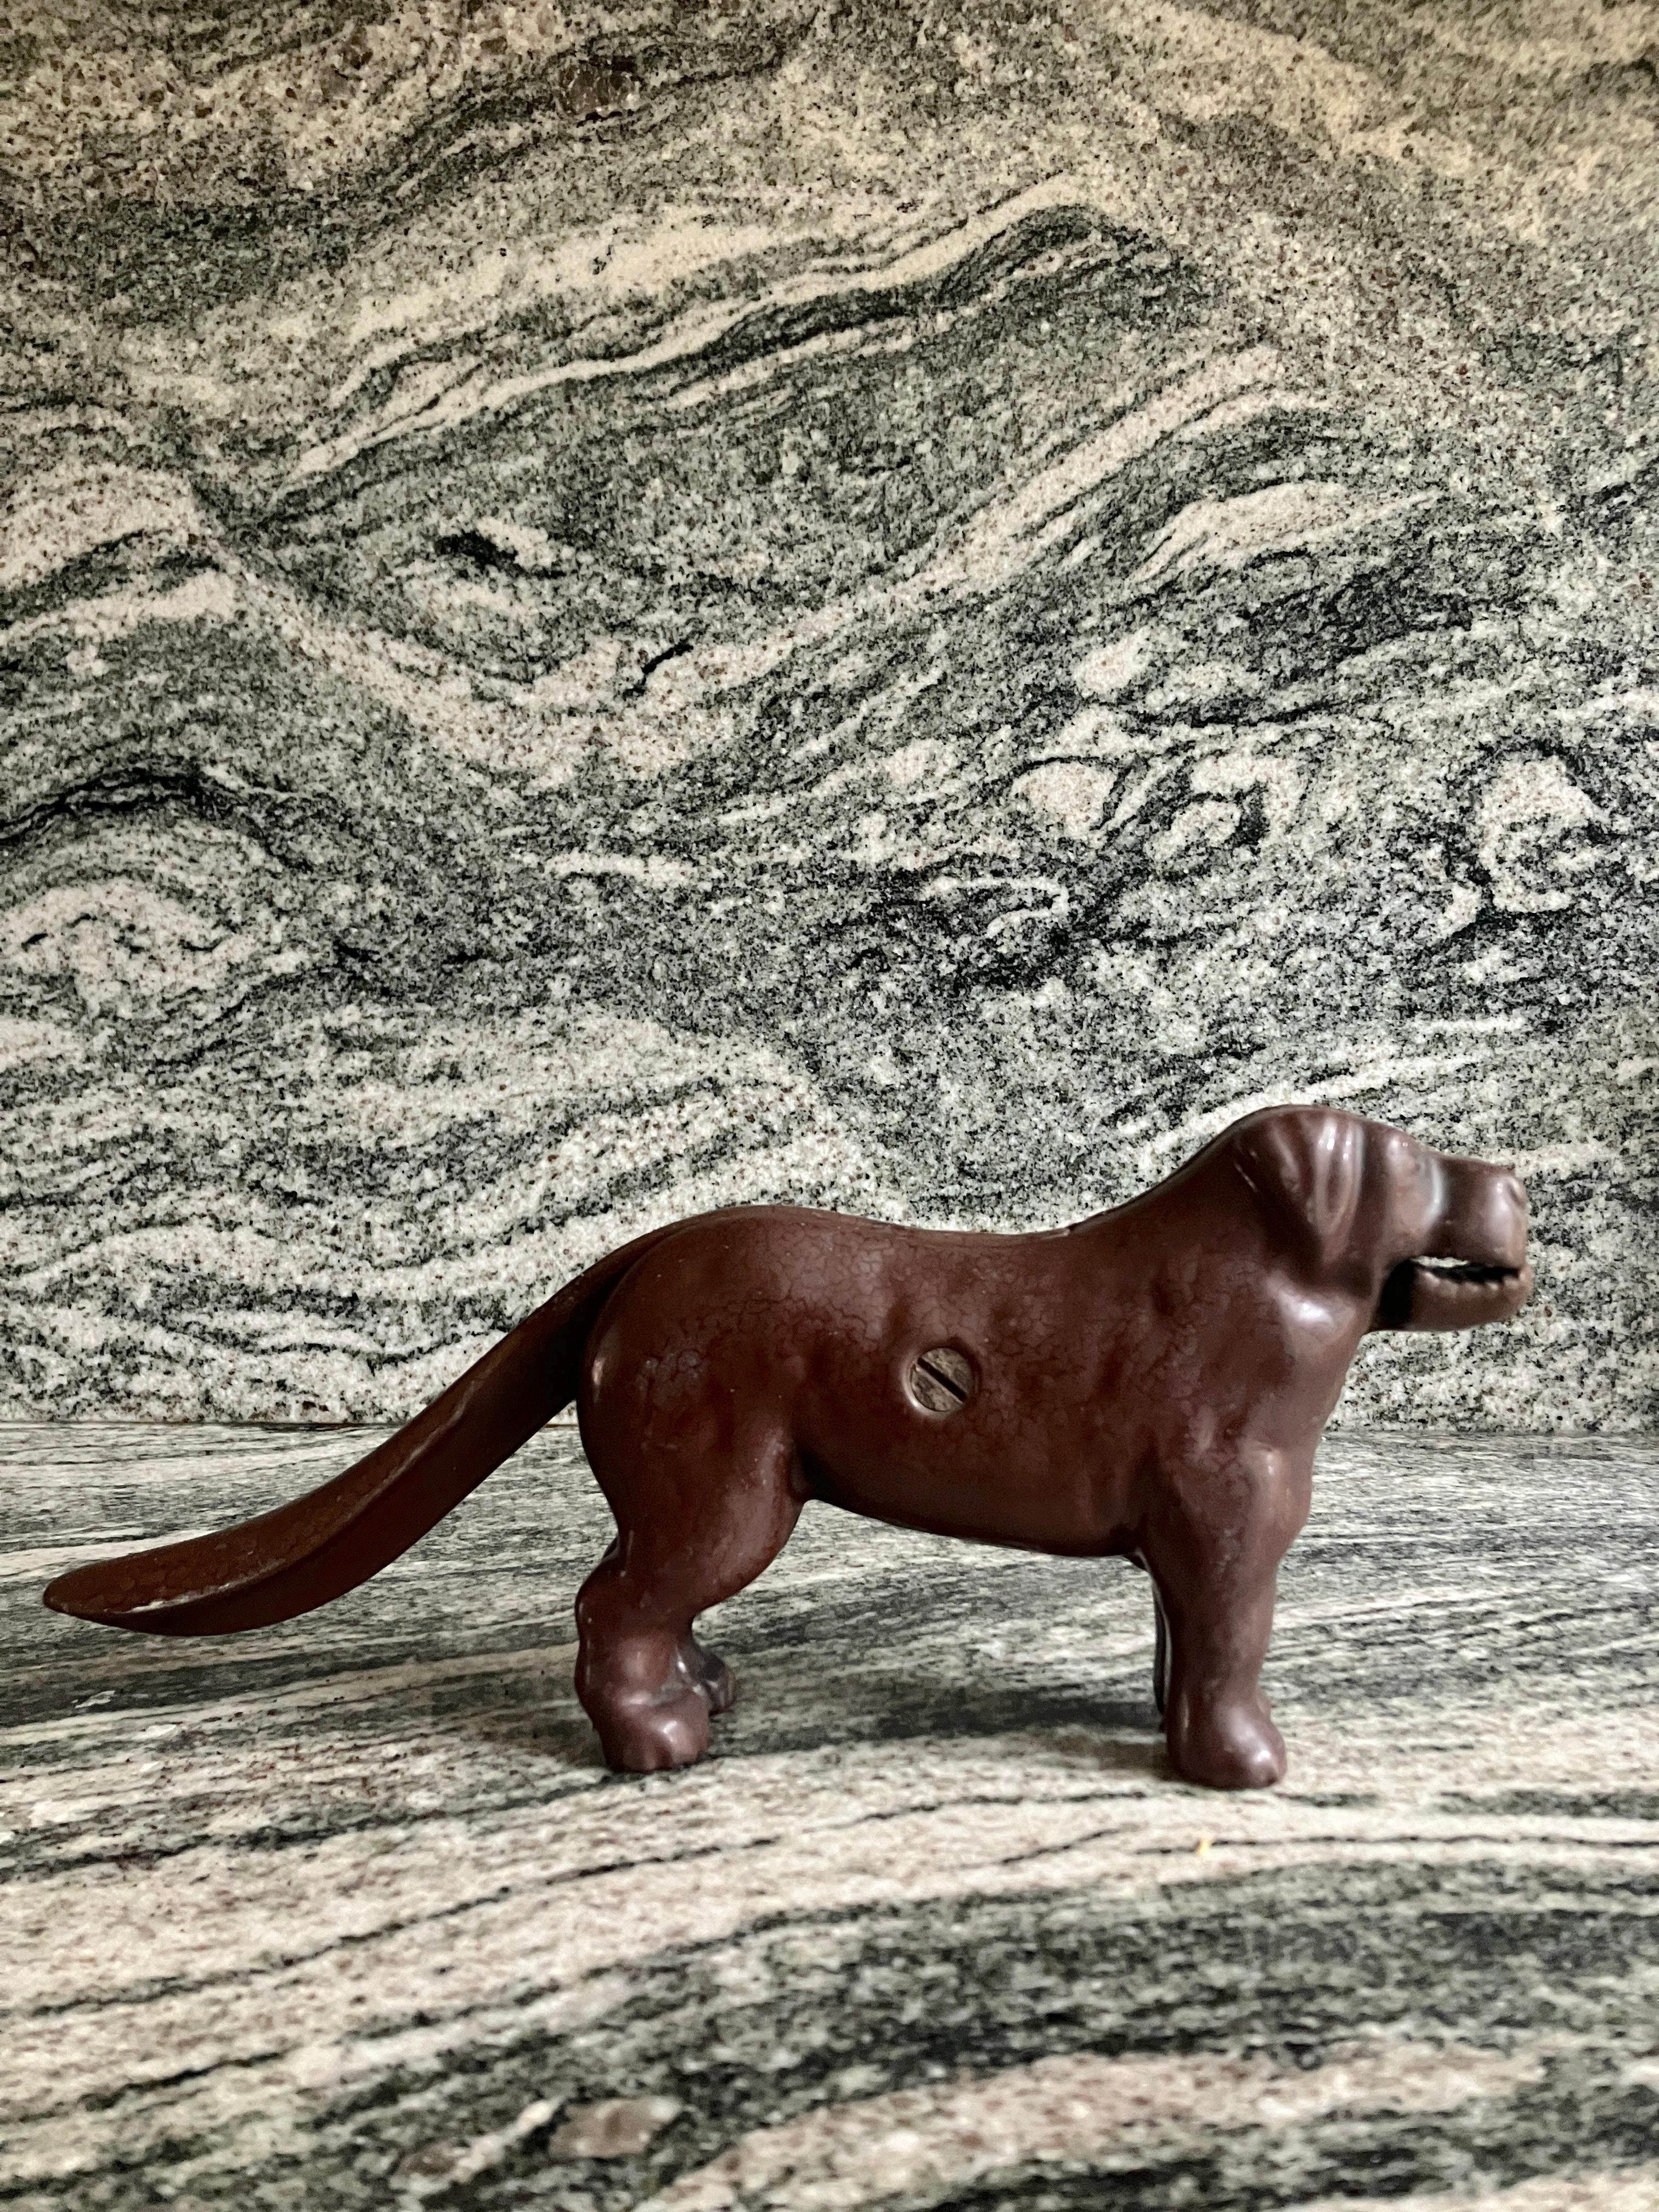 A gorgeous late Victorian cast iron dog nutcracker from England. The antique nutcracker comes in a handsome dog form.
This is a very heavy item, made of cast iron and enameled brown. The dog would look great as a decorative item, too. 

In good